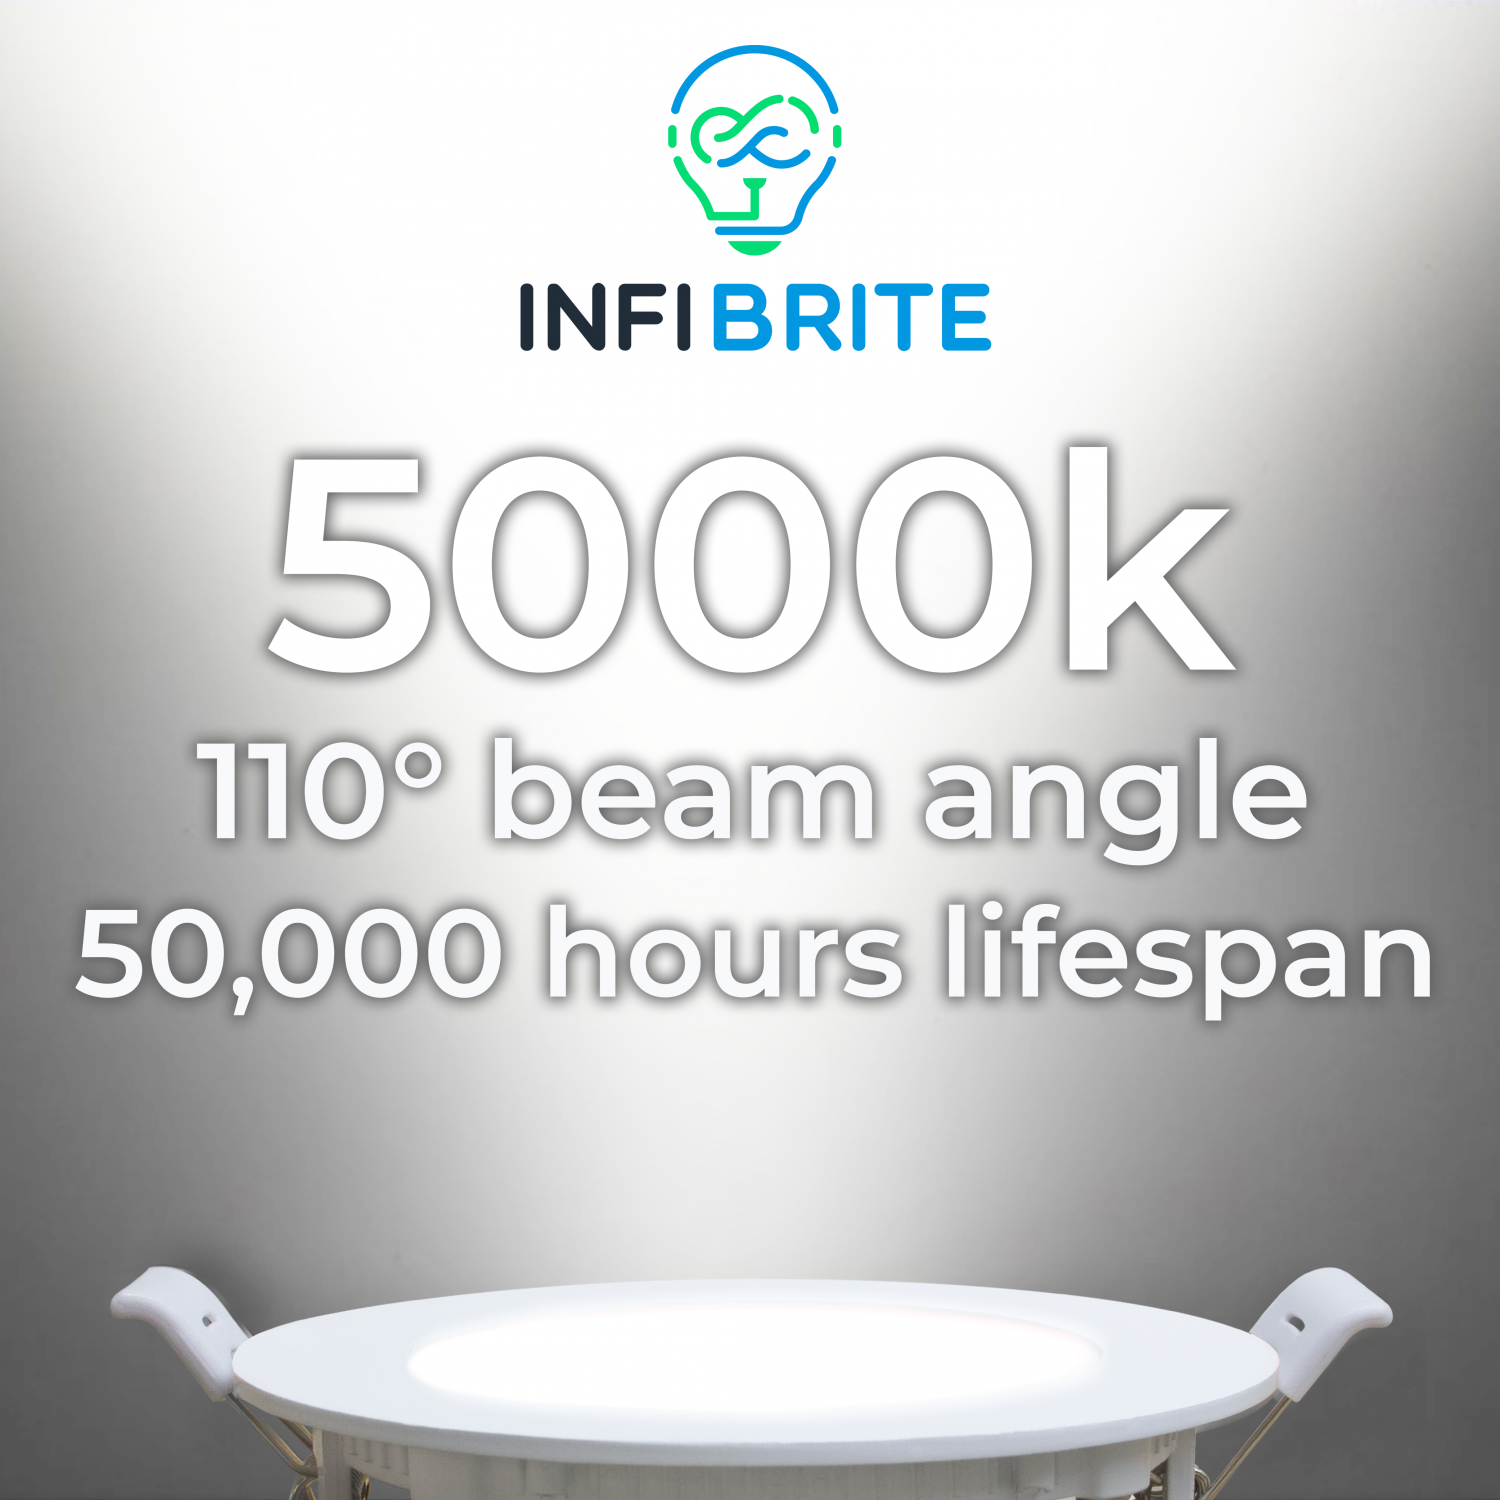 Infibrite 4 Inch 5000K Daylight 9W 750 LM Ultra-Slim LED Ceiling Light with Junction Box, Flush Mount, Dimmable, Fixture for Bedroom, Wet Rated for Bathroom, Easy Install, 75W Eqv, ETL & Energy Star, US Company (6 Pack)